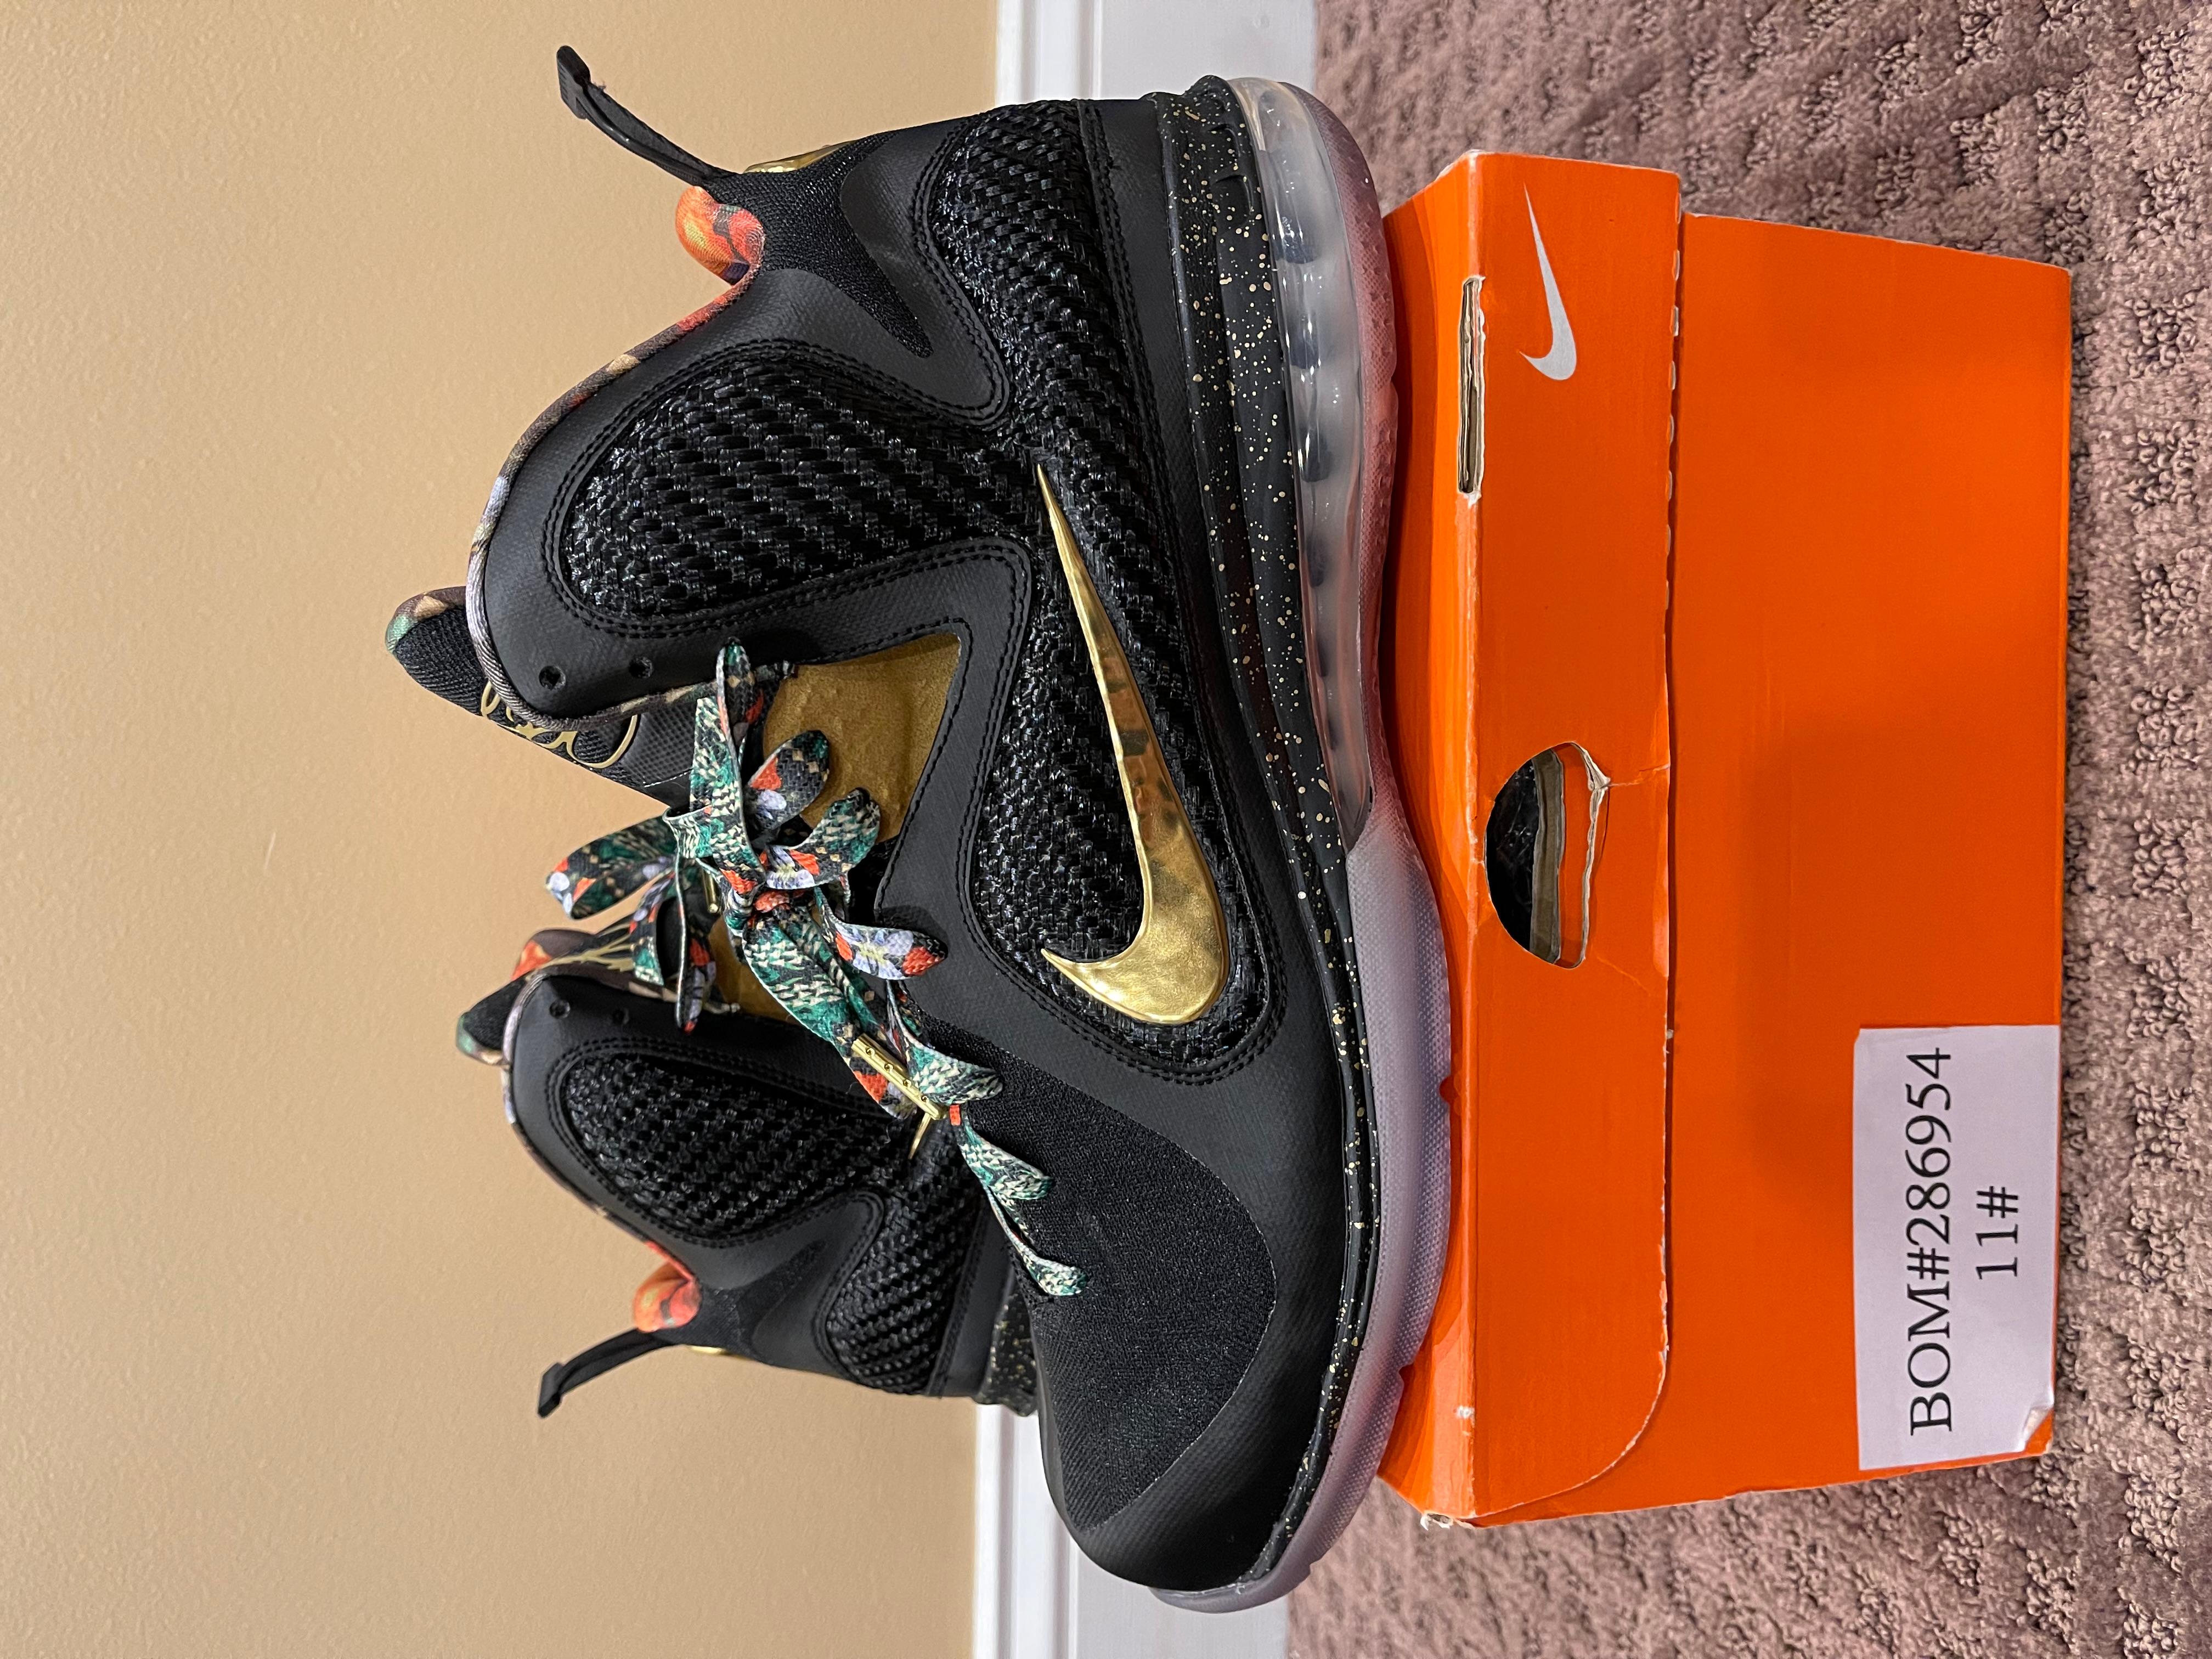 Nike LeBron 9 “Watch the Throne” Promo Sample

Size 11

Og BOM box included

Excellent condition (note: small minor mark on left shoe; see pics. Could easily be removed using shoe cleaner)

EXTREMELY RARE LeBron 9 Sample WTT inspired from the Kanye